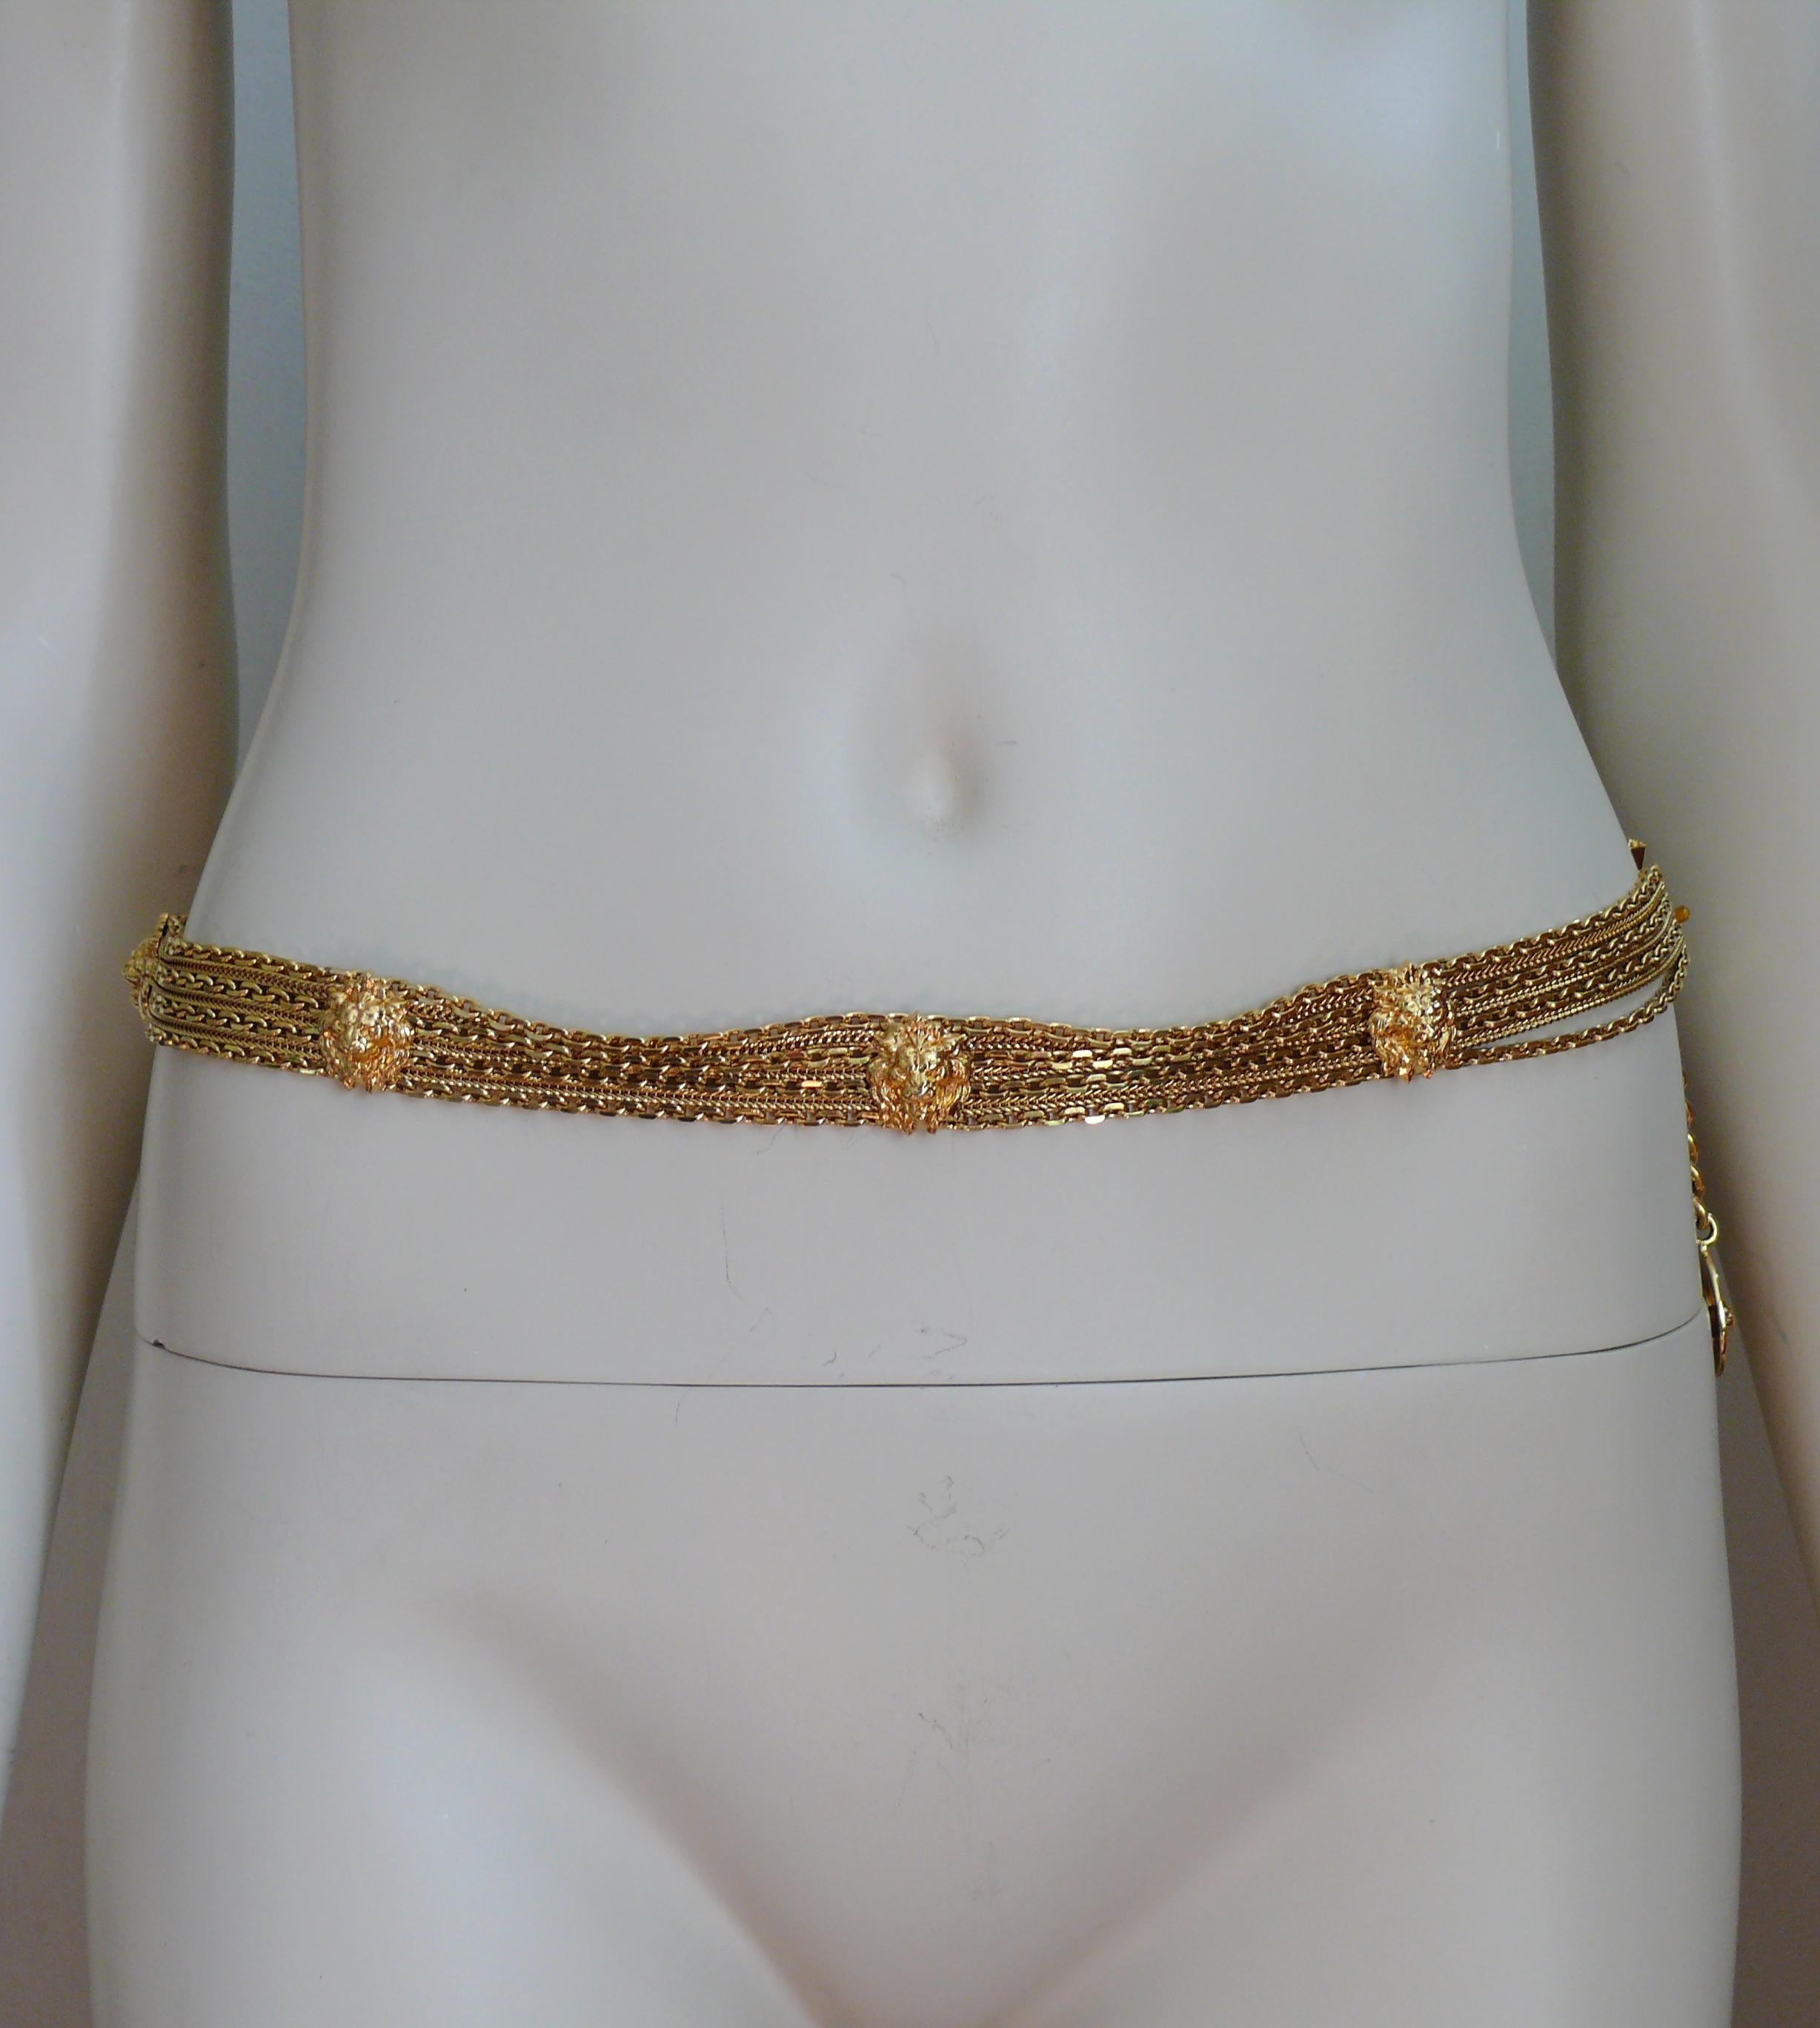 CHANEL vintage rare gold toned multi chain belt featuring seven 3D iconic lion head medallions. This belt terminates with CC logo and lion head coin charm.

Adjustable hook closure.

Embossed CHANEL on the hook closure.

Indicative measurements :